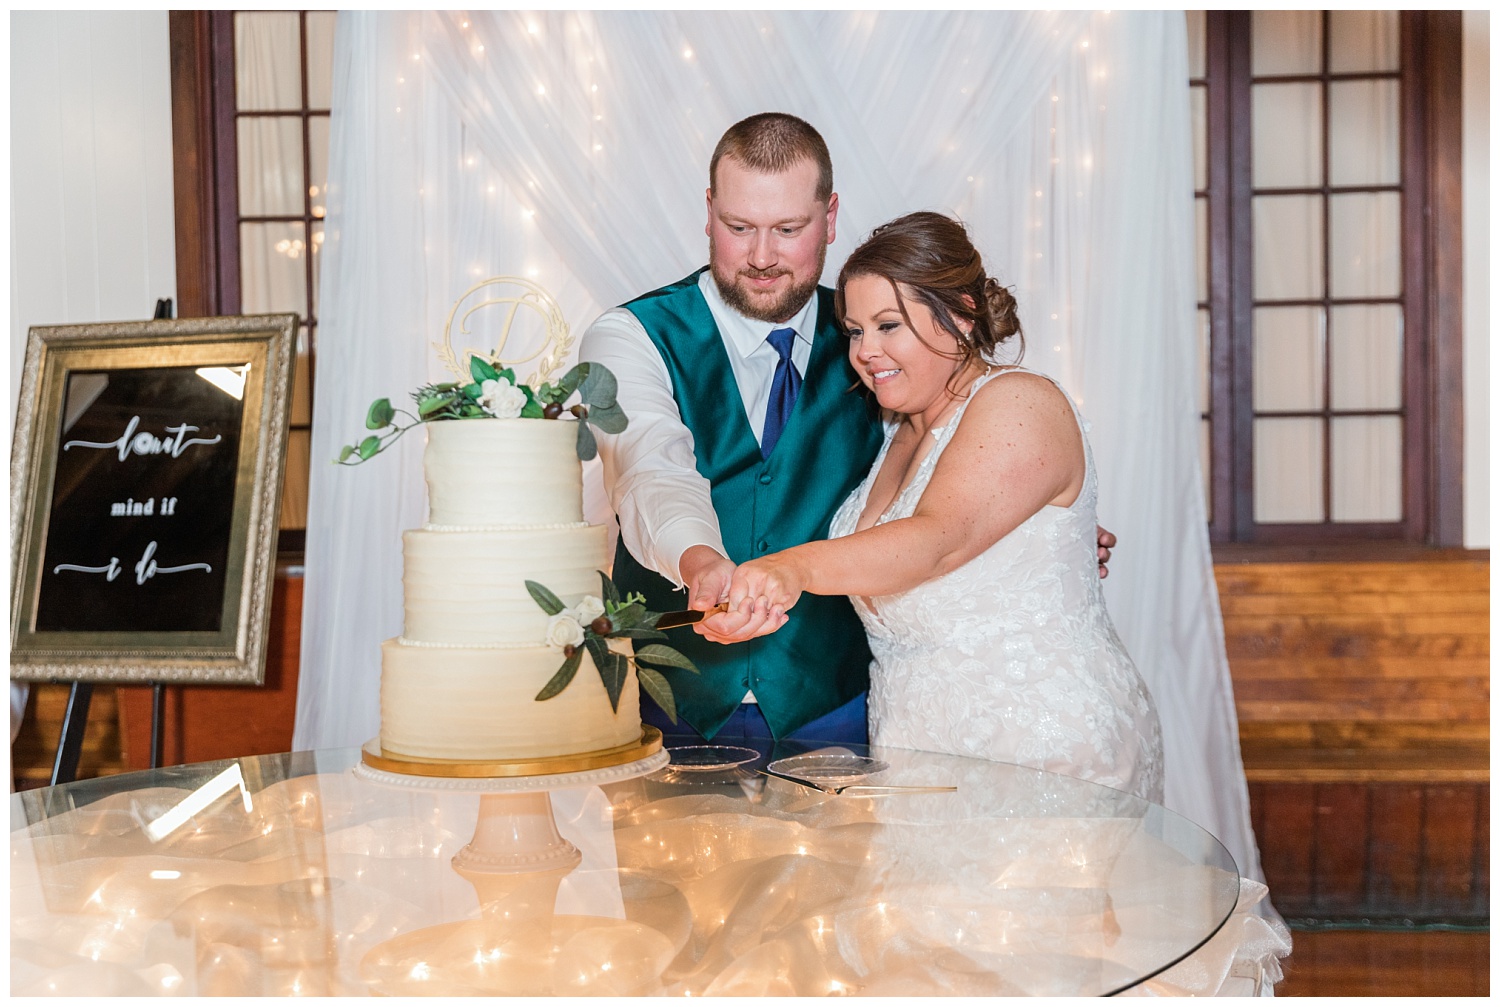 bride and groom cutting their cake at wedding reception in Ohio